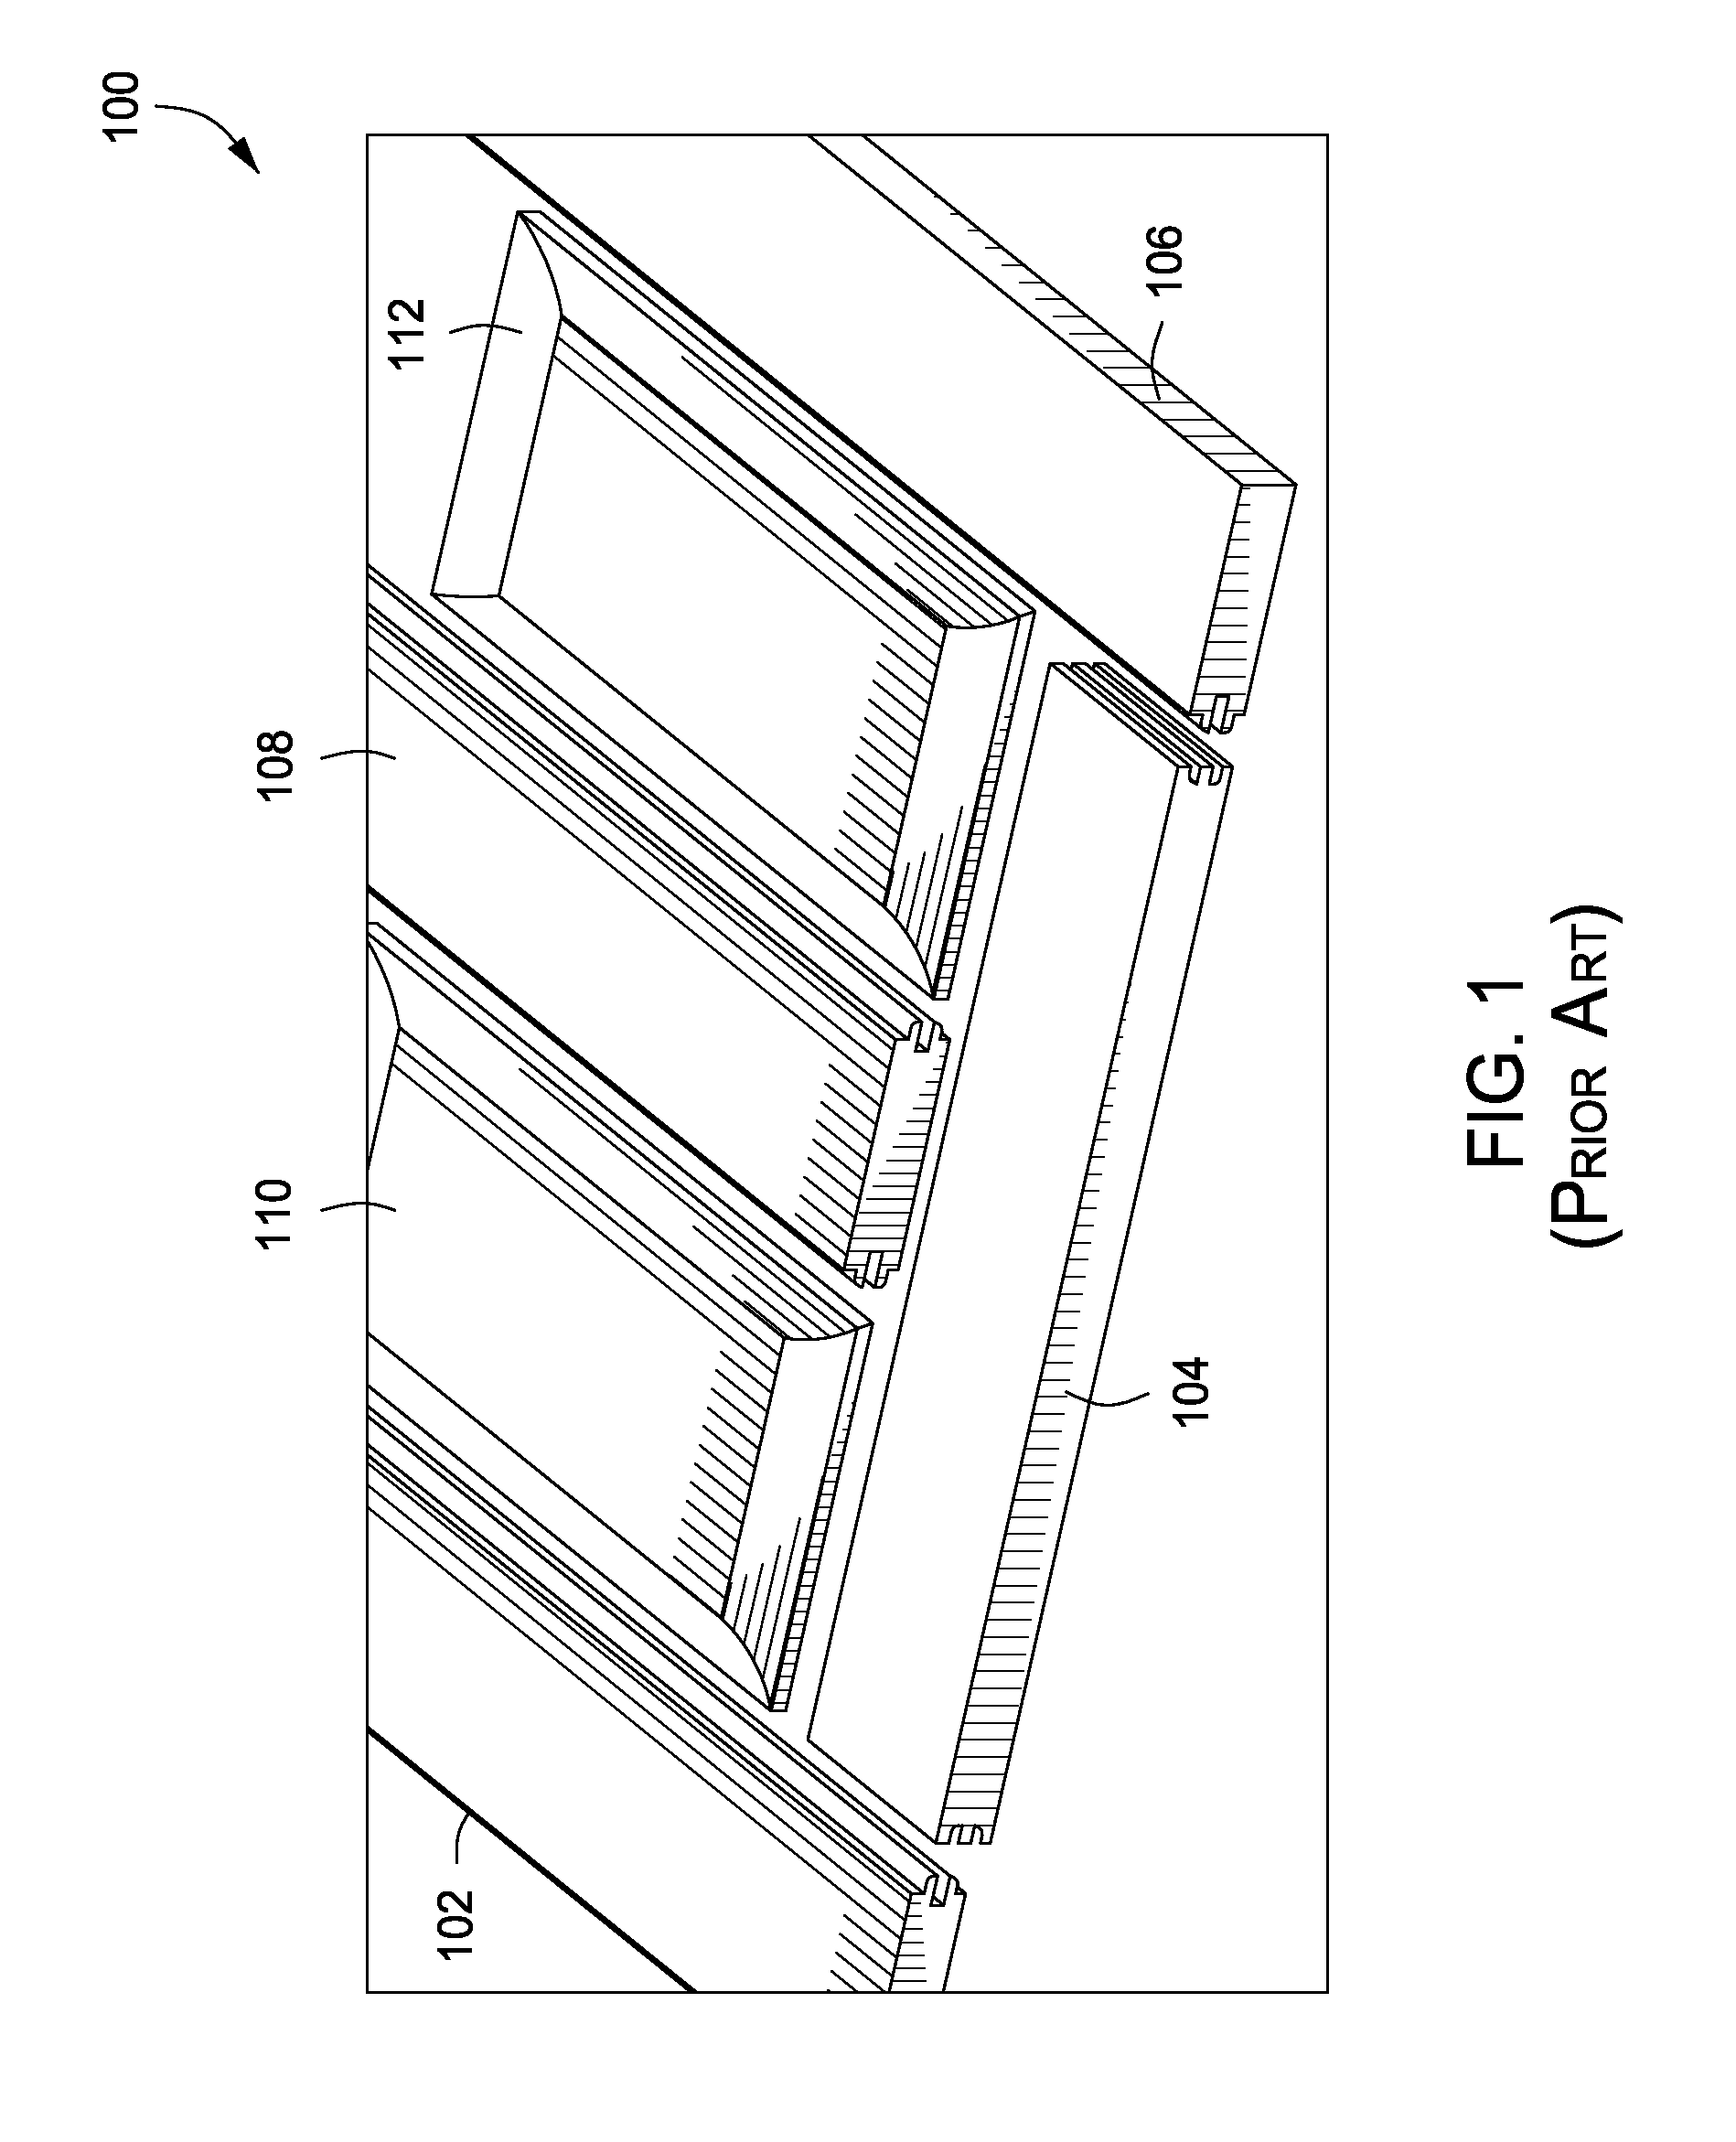 System, Method and Apparatus for Producing Fire Rated Doors